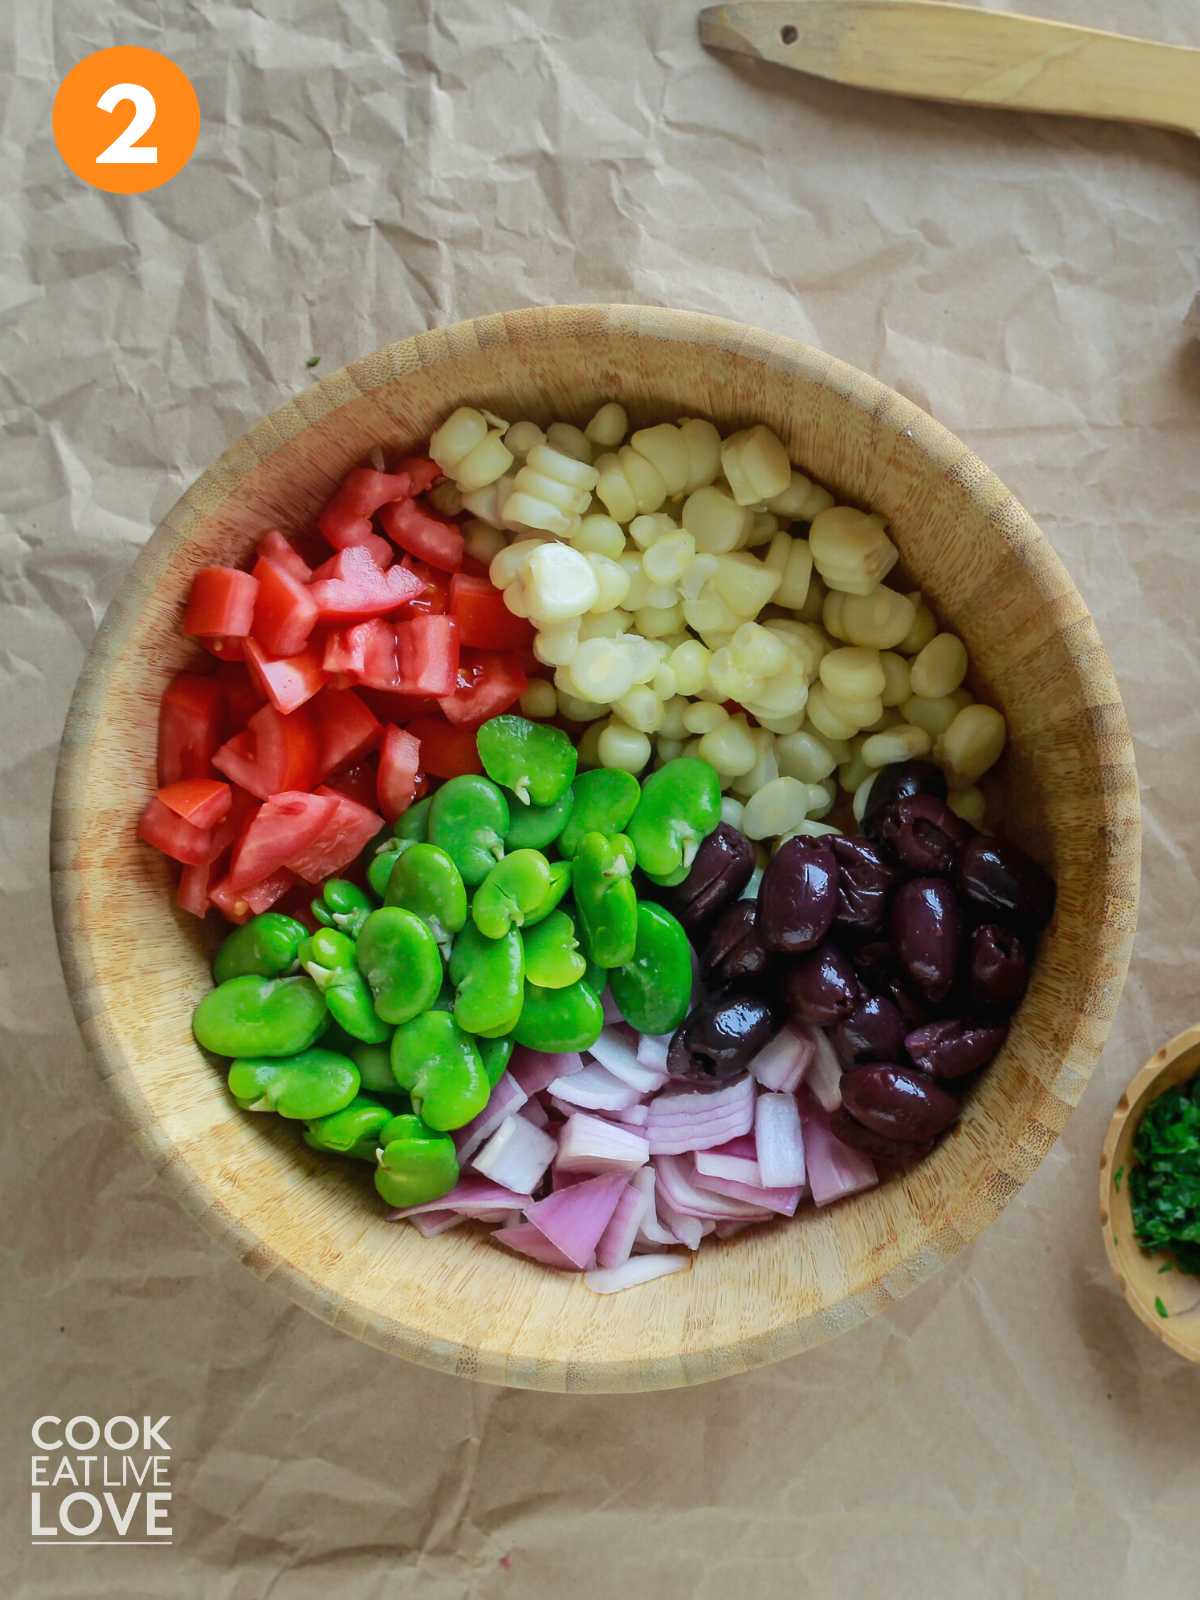 Ingredients in peruvian salad in a bowl.